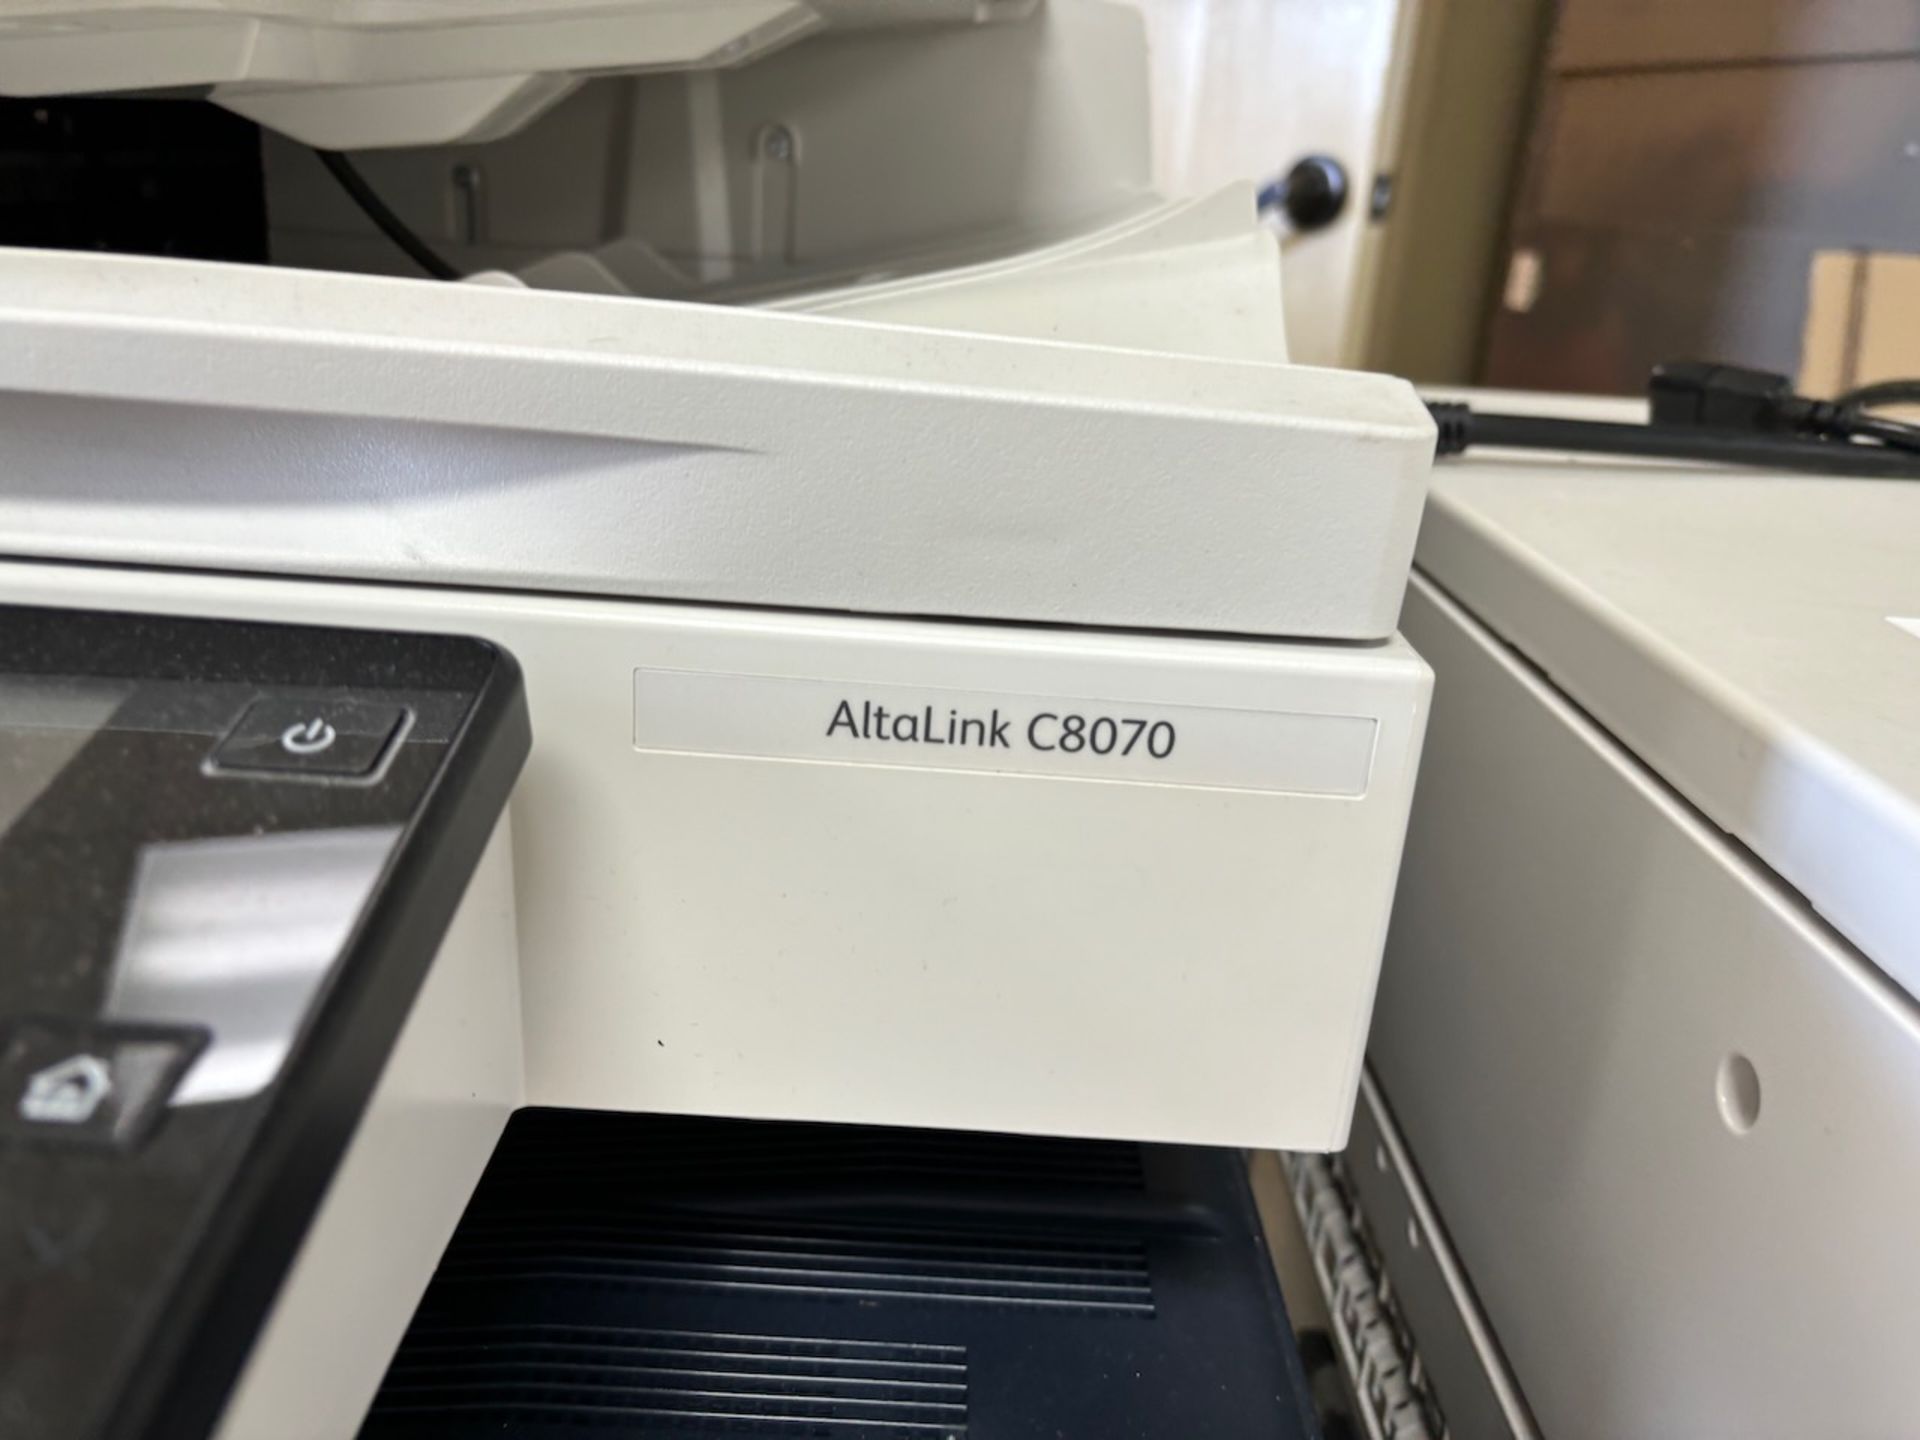 2019 Xerox Multifunction Color Printer - See Auctioneers Note - Image 3 of 5